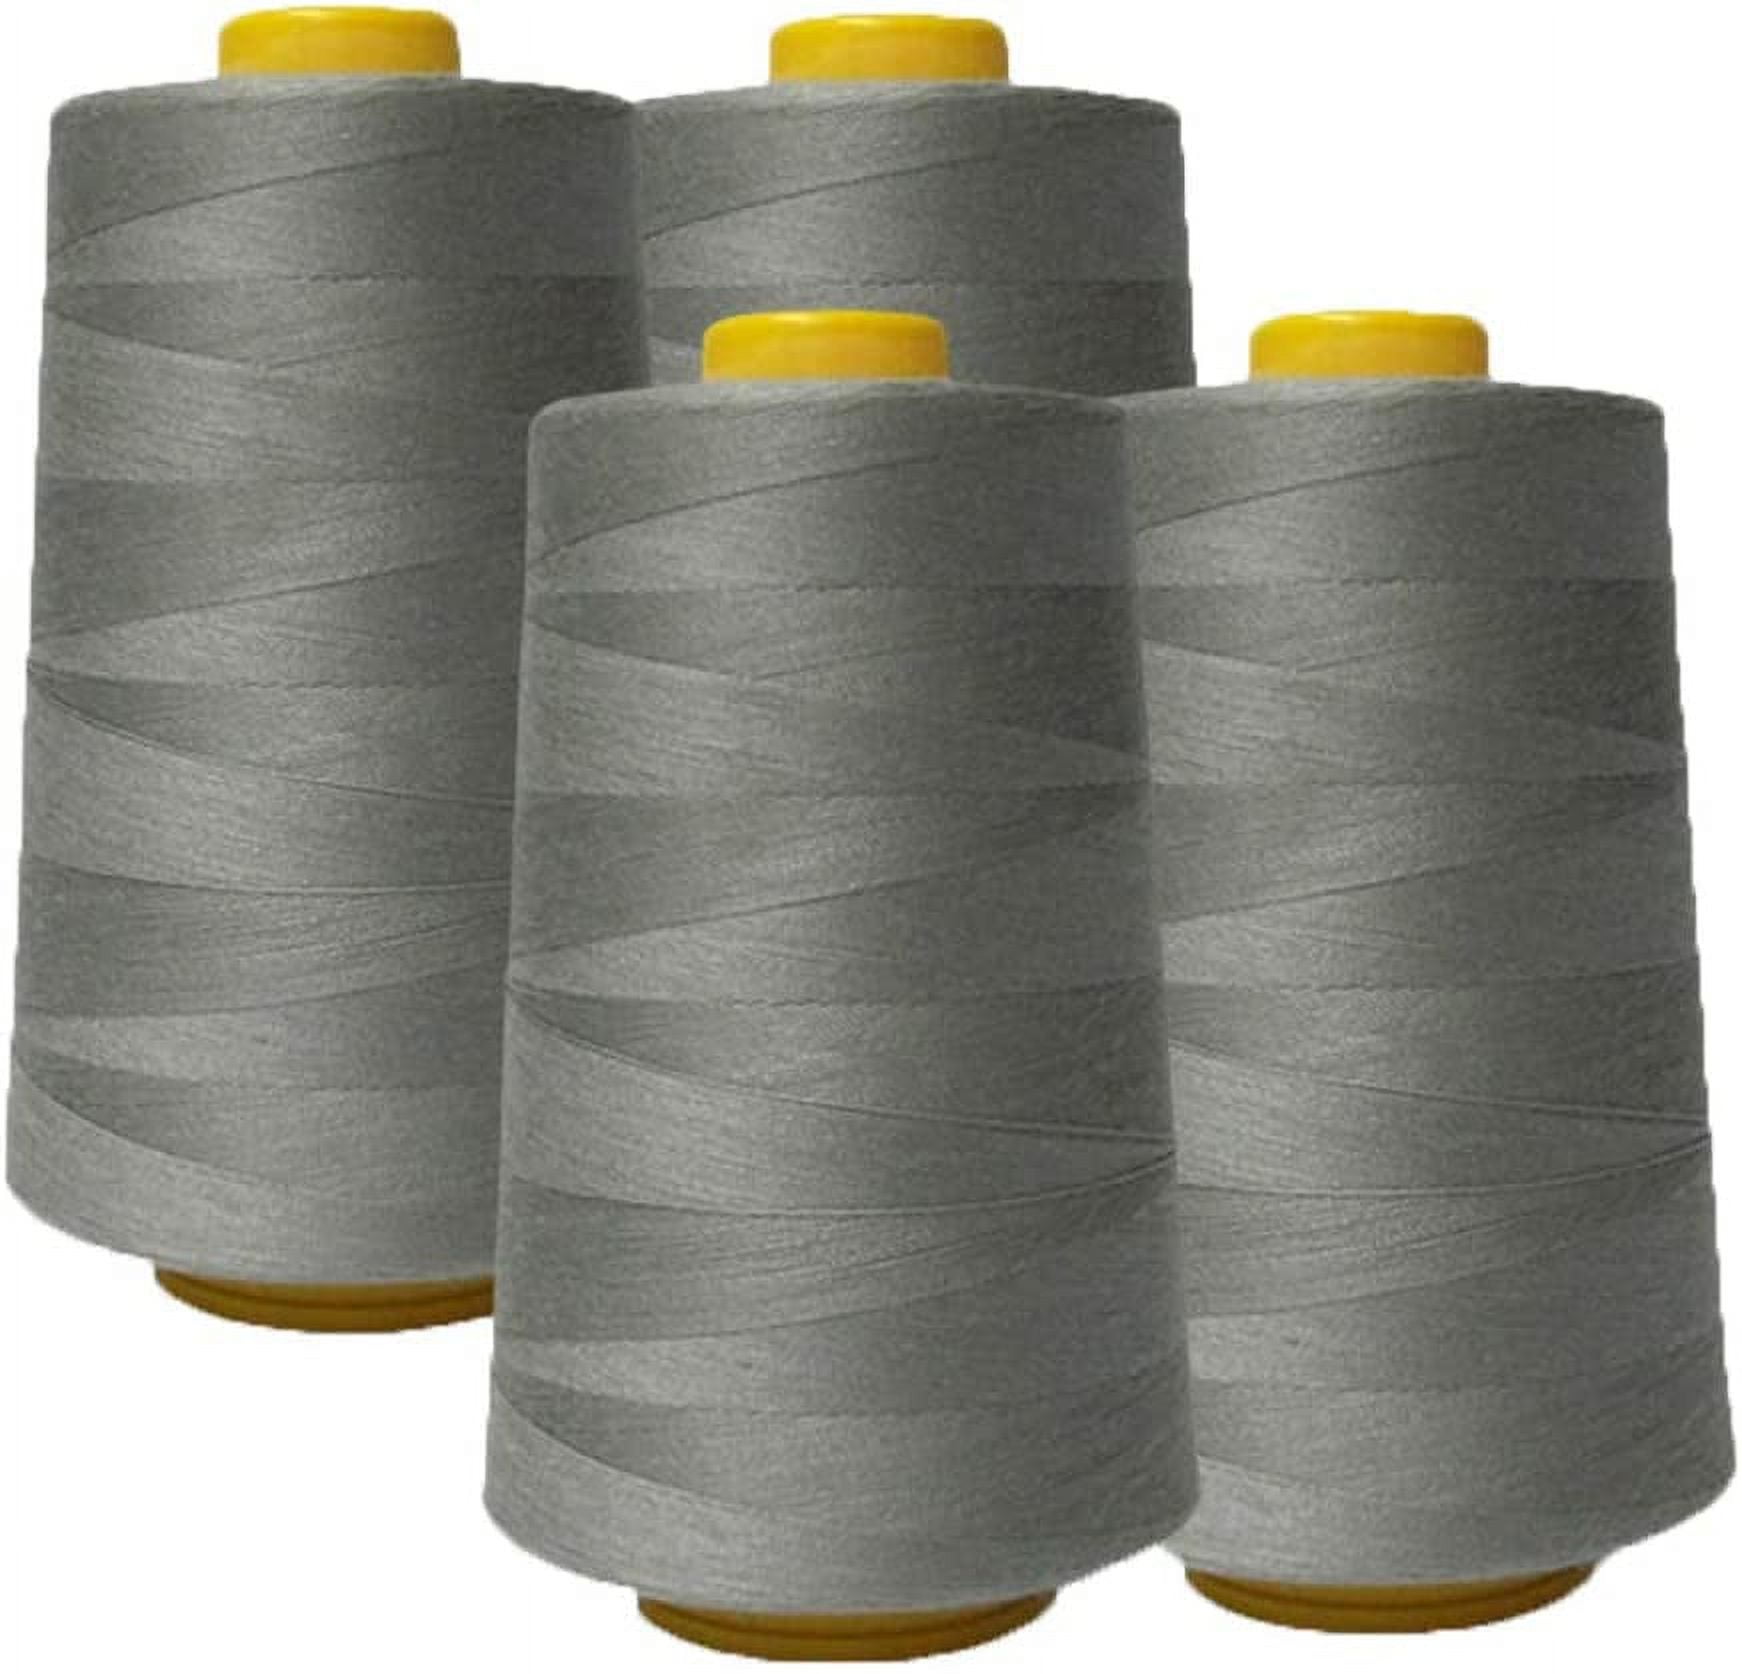  AK Trading 4-Pack Periwinkle All Purpose Sewing Thread Cones  (6000 Yards Each) of High Tensile Polyester Thread Spools for Sewing,  Quilting, Serger Machines, Overlock, Merrow & Hand Embroidery